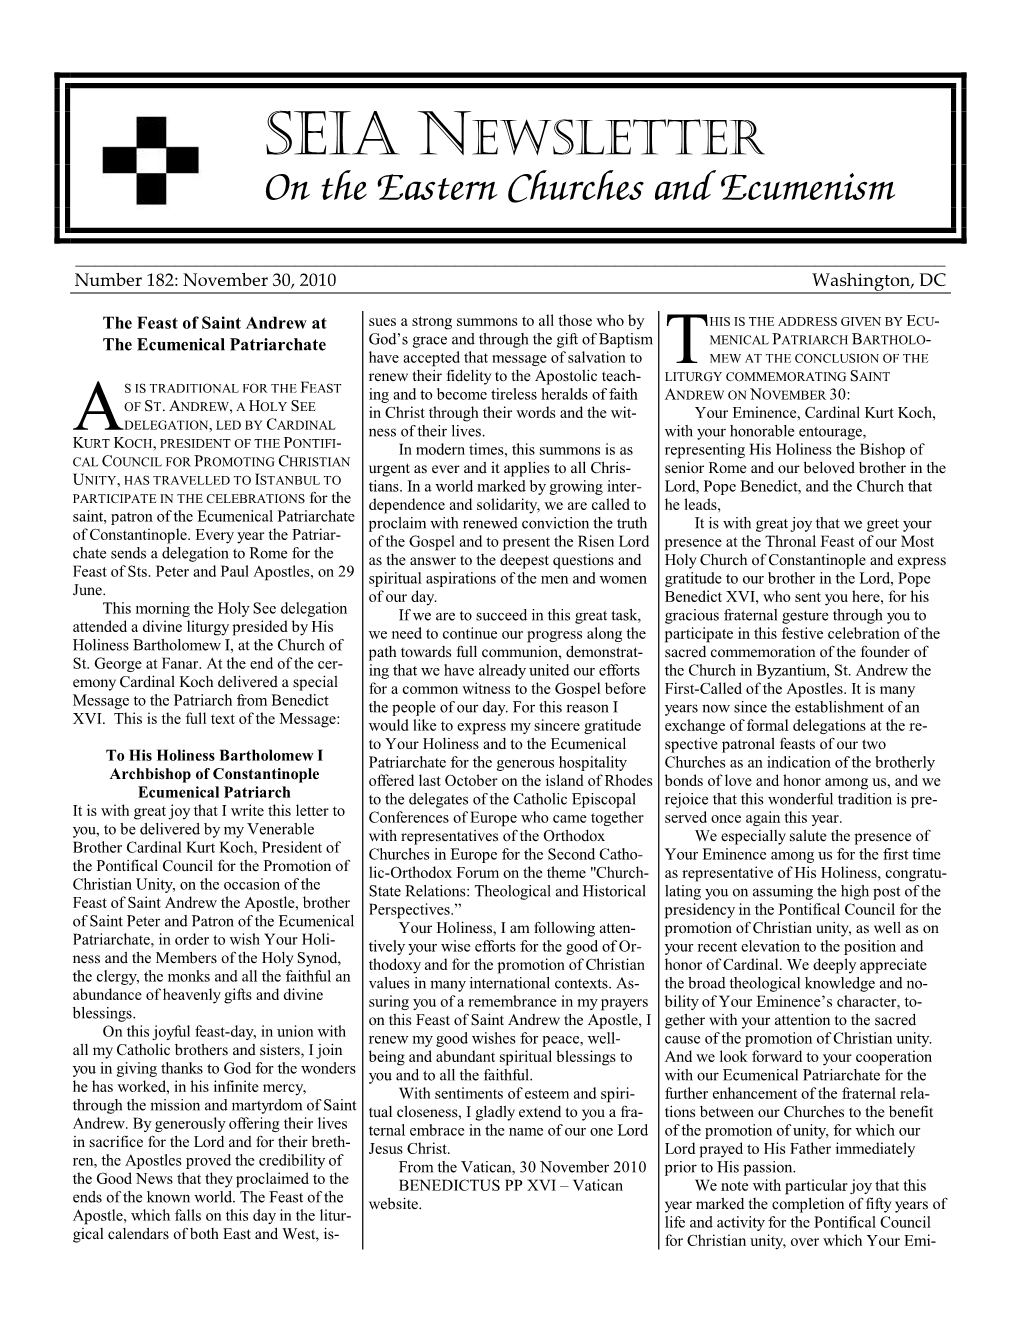 SEIA NEWSLETTER on the Eastern Churches and Ecumenism